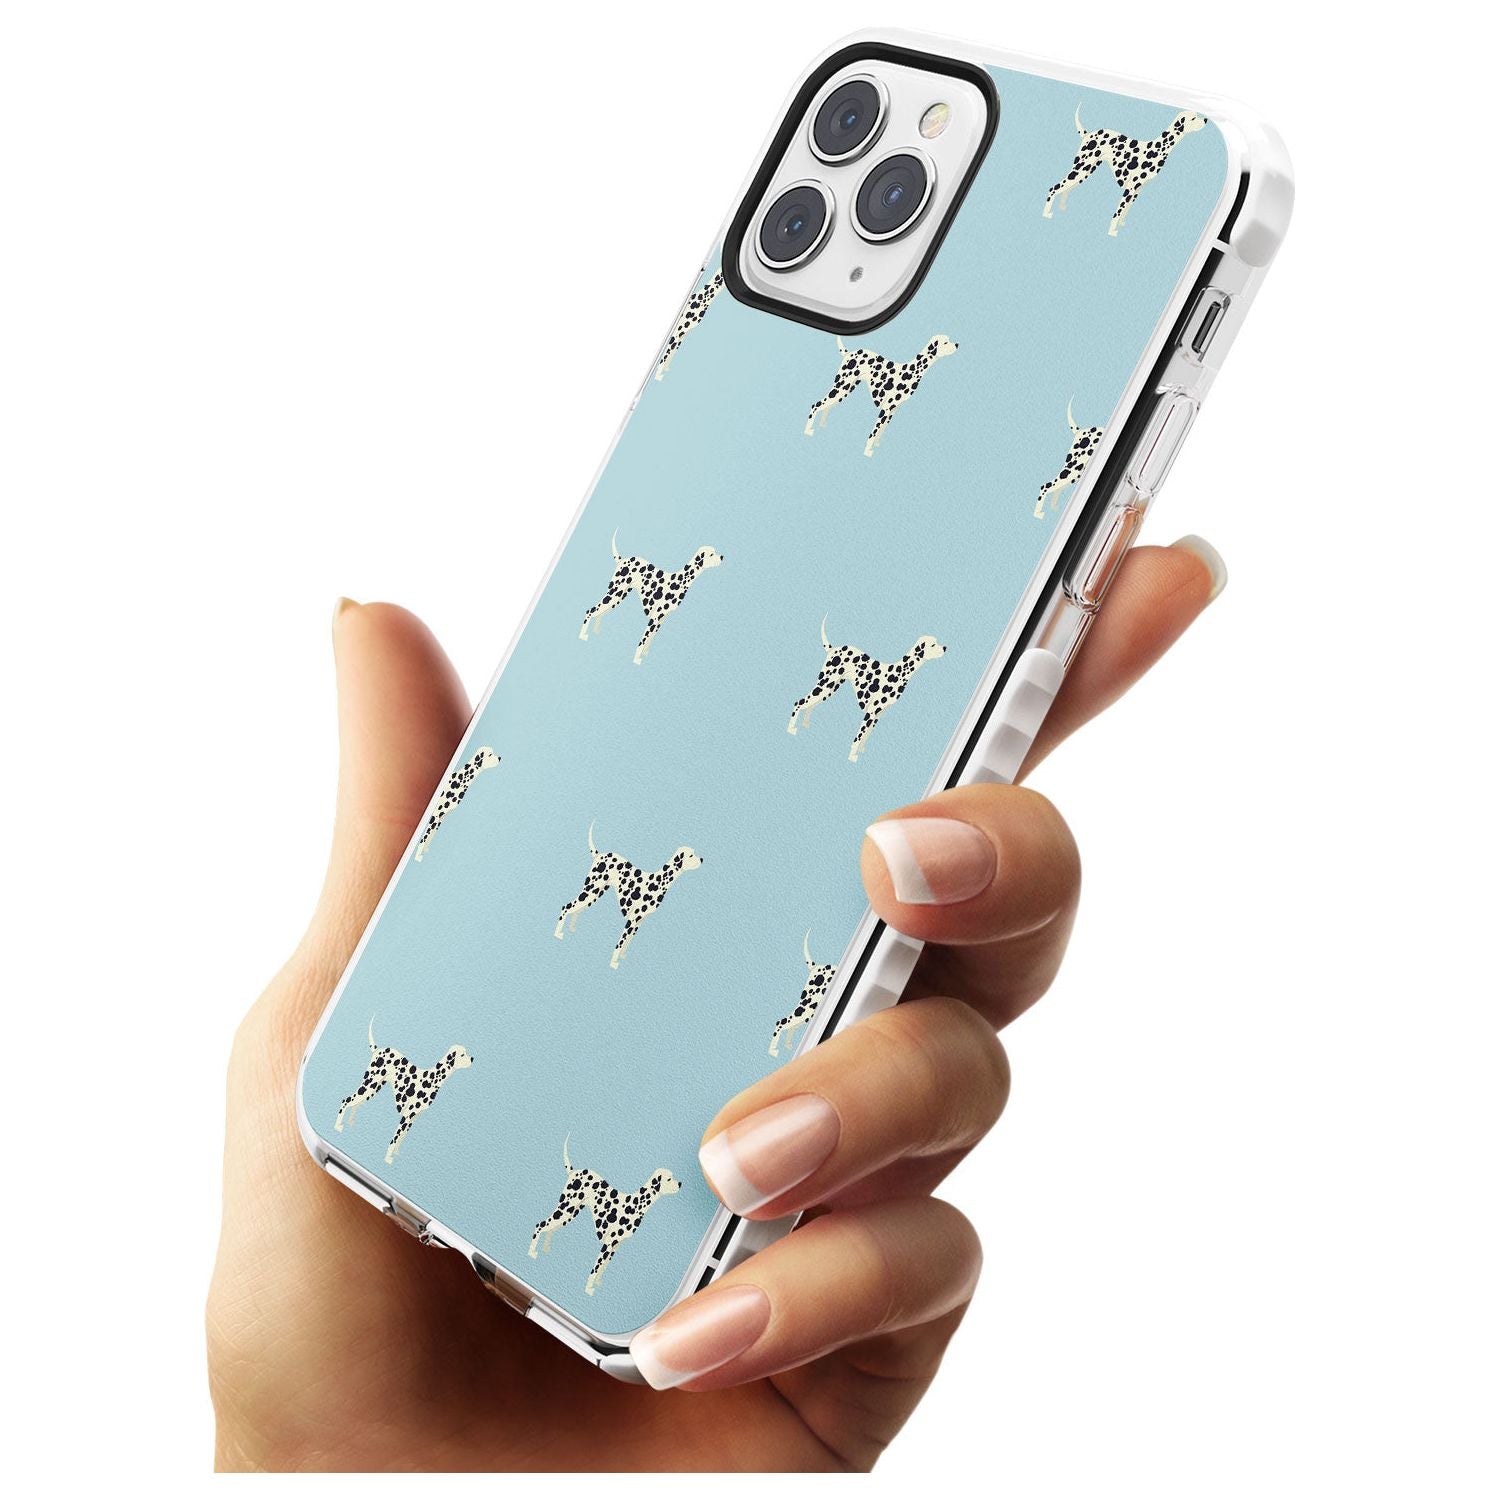 Dalmation Dog Pattern Impact Phone Case for iPhone 11 Pro Max